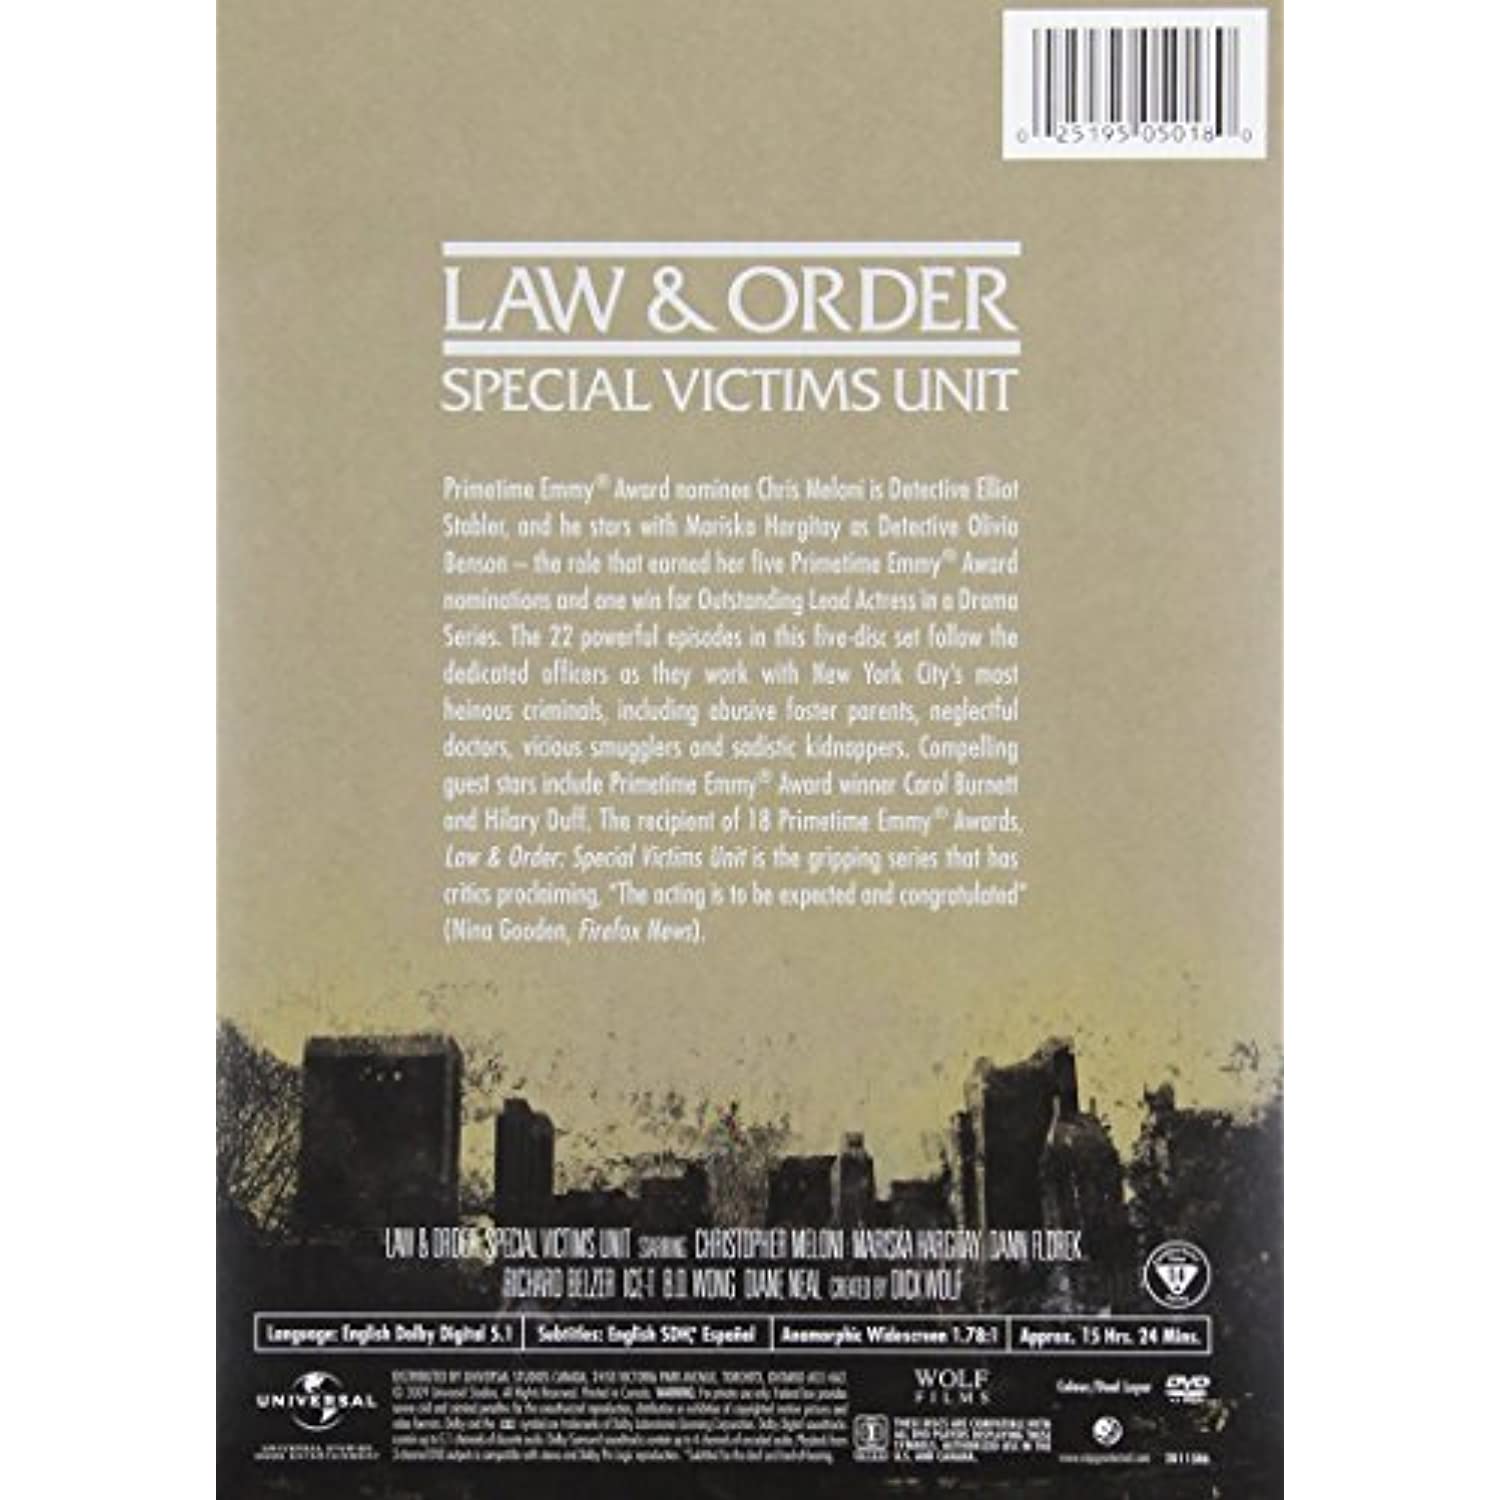 Law & Order: Special Victims Unit: Year Ten (DVD), Universal Studios, Drama - image 2 of 2